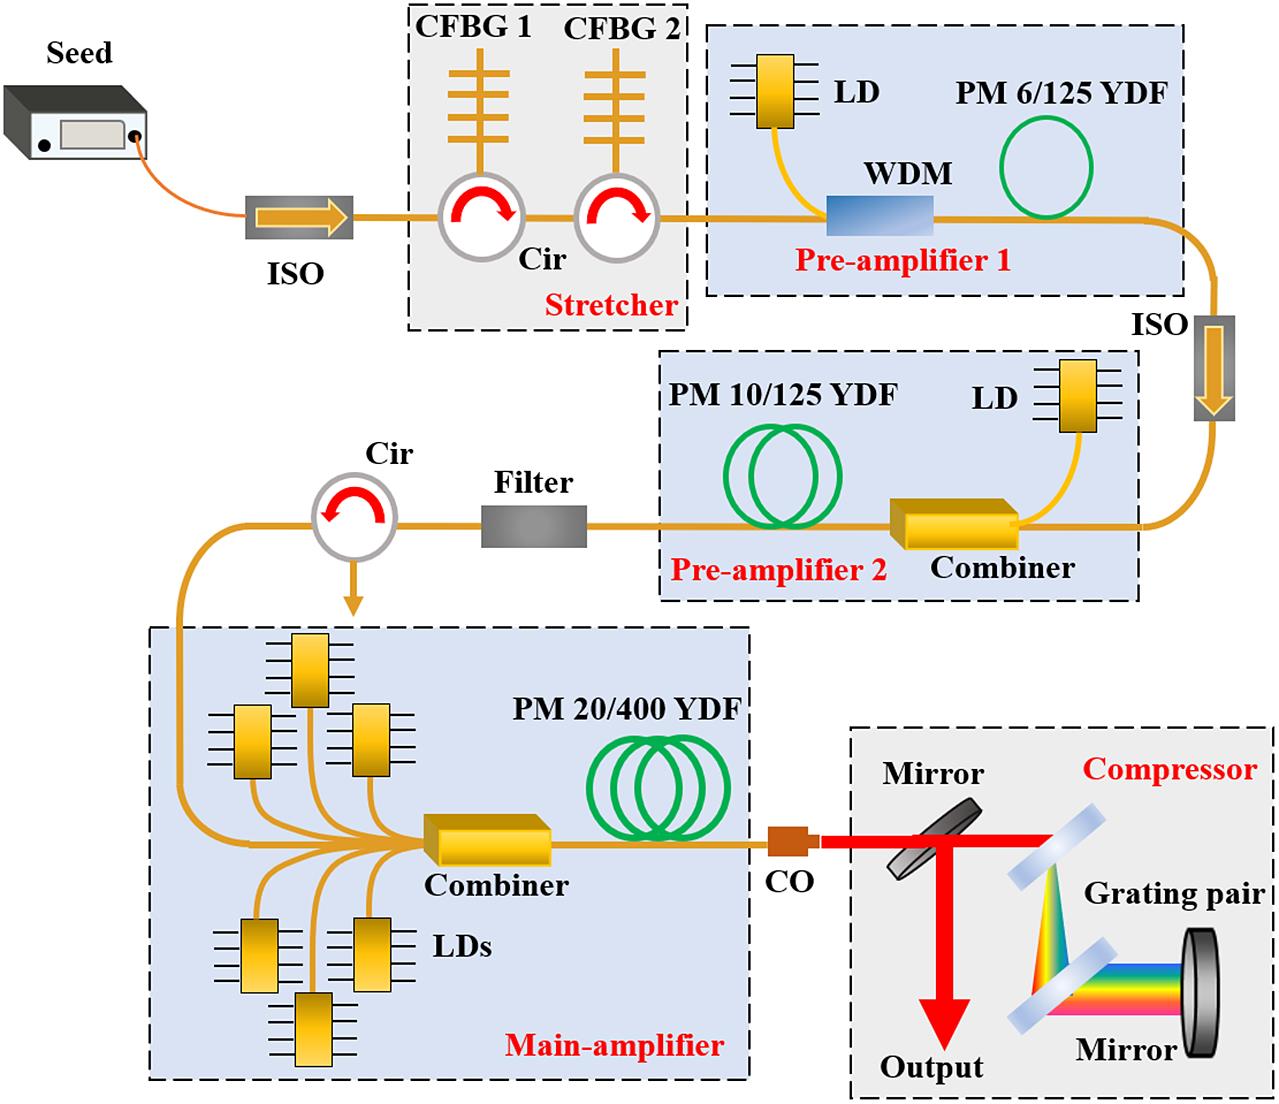 Experimental setup of the high-power linearly polarized CPA system. ISO, isolator; Cir, circulator; CFBG, chirped fiber Bragg grating; LD, laser diode; WDM, wavelength division multiplexer; PM YDF, polarization-maintaining Yb-doped fiber; CO, collimator.